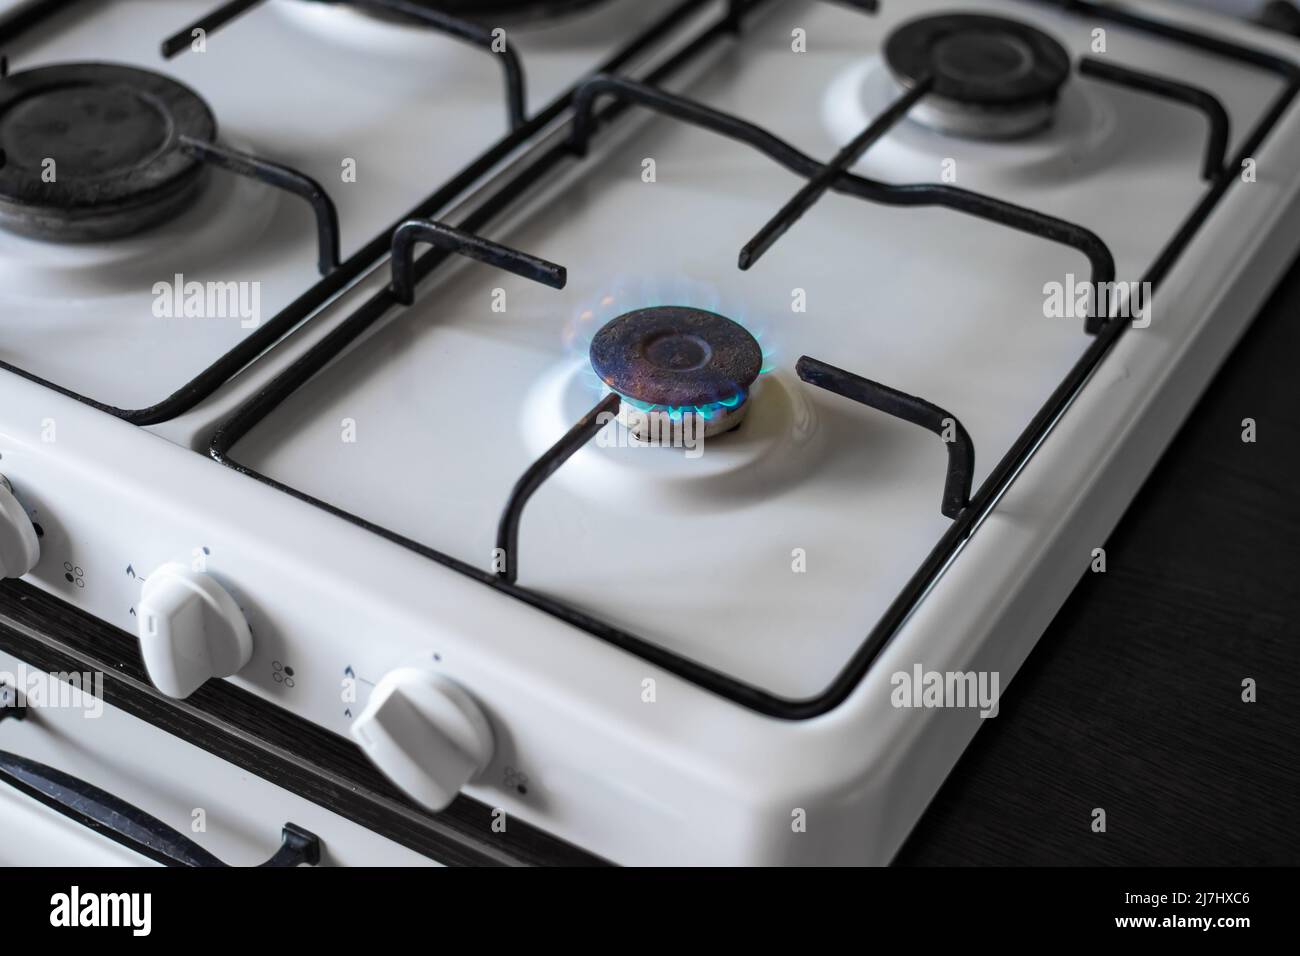 Gas stove burner with burning gas. Sale and purchase of gas fuel Stock  Photo - Alamy